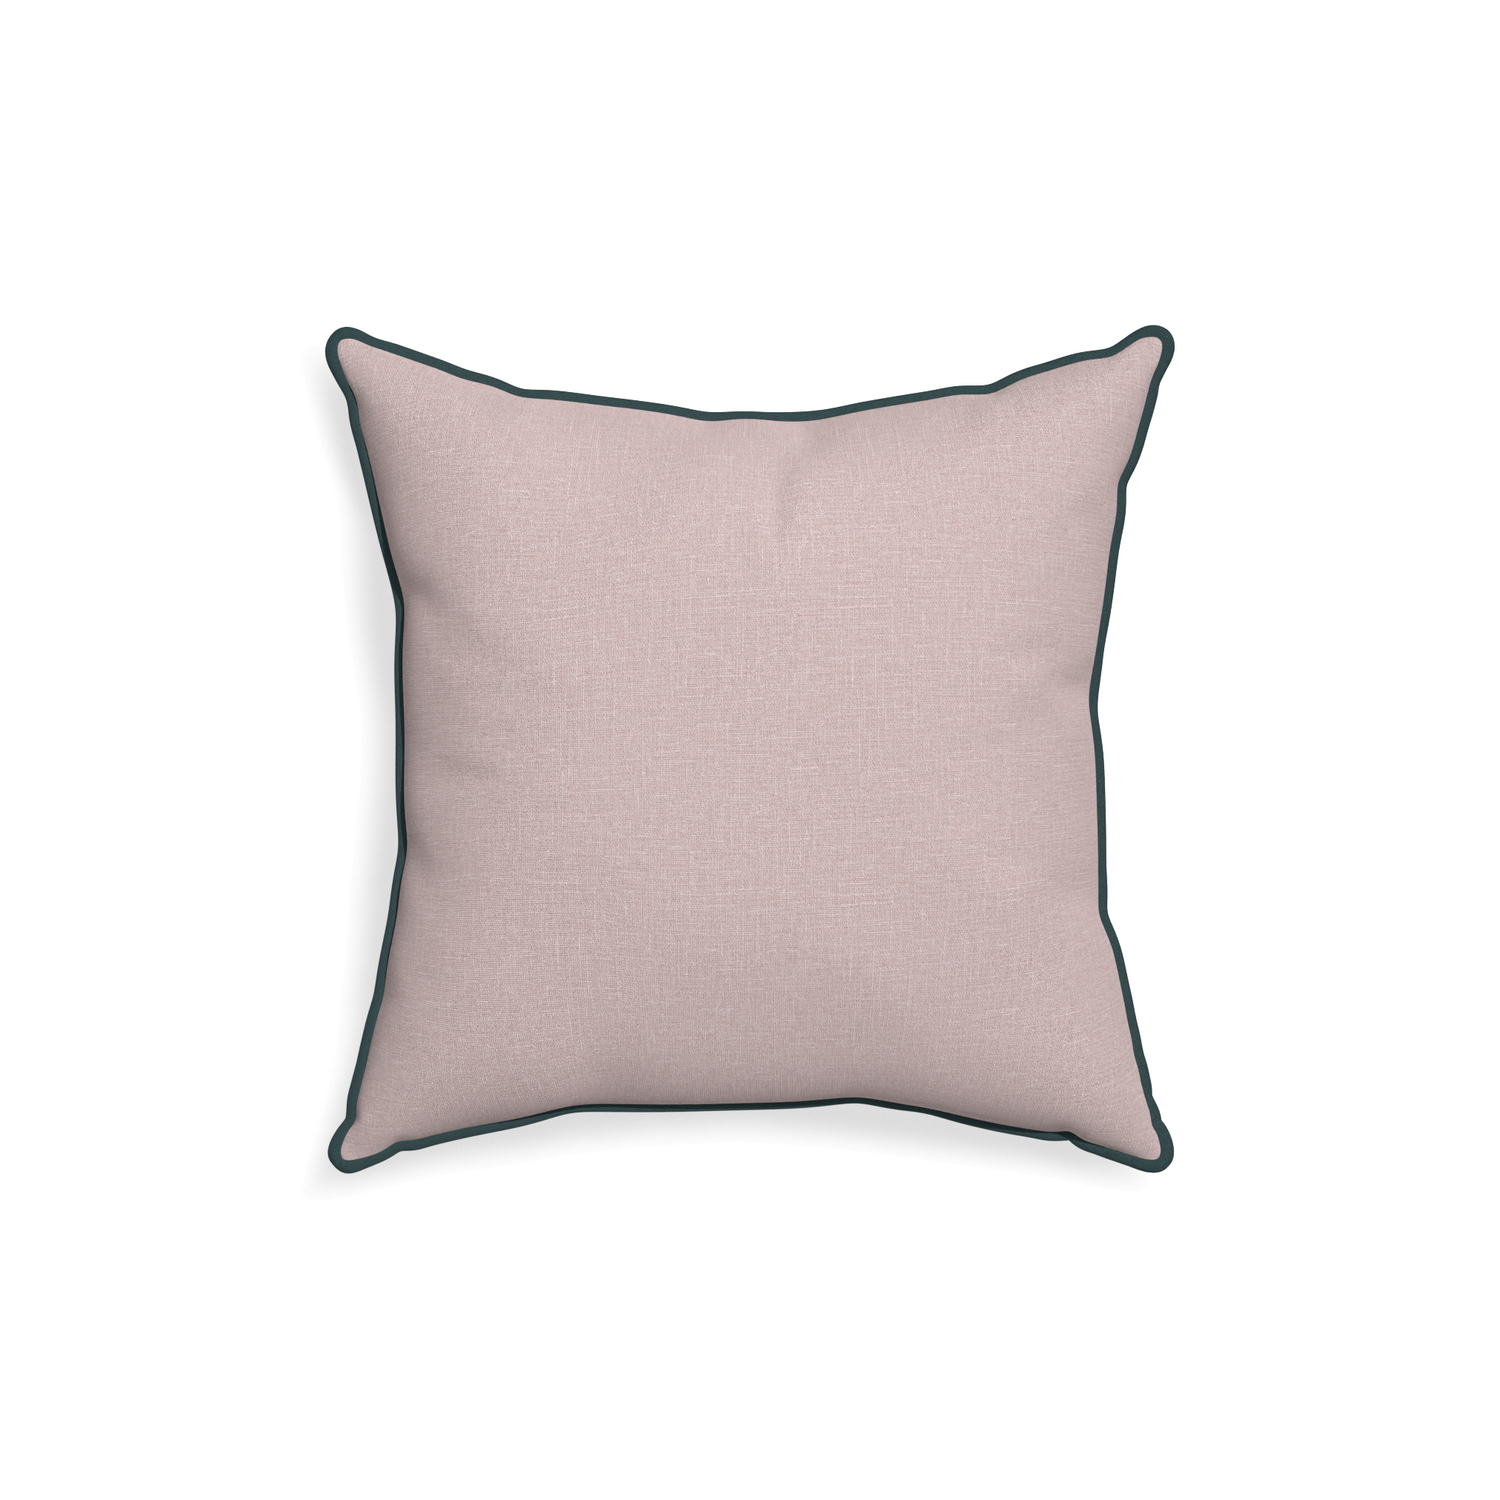 18-square orchid custom mauve pinkpillow with p piping on white background